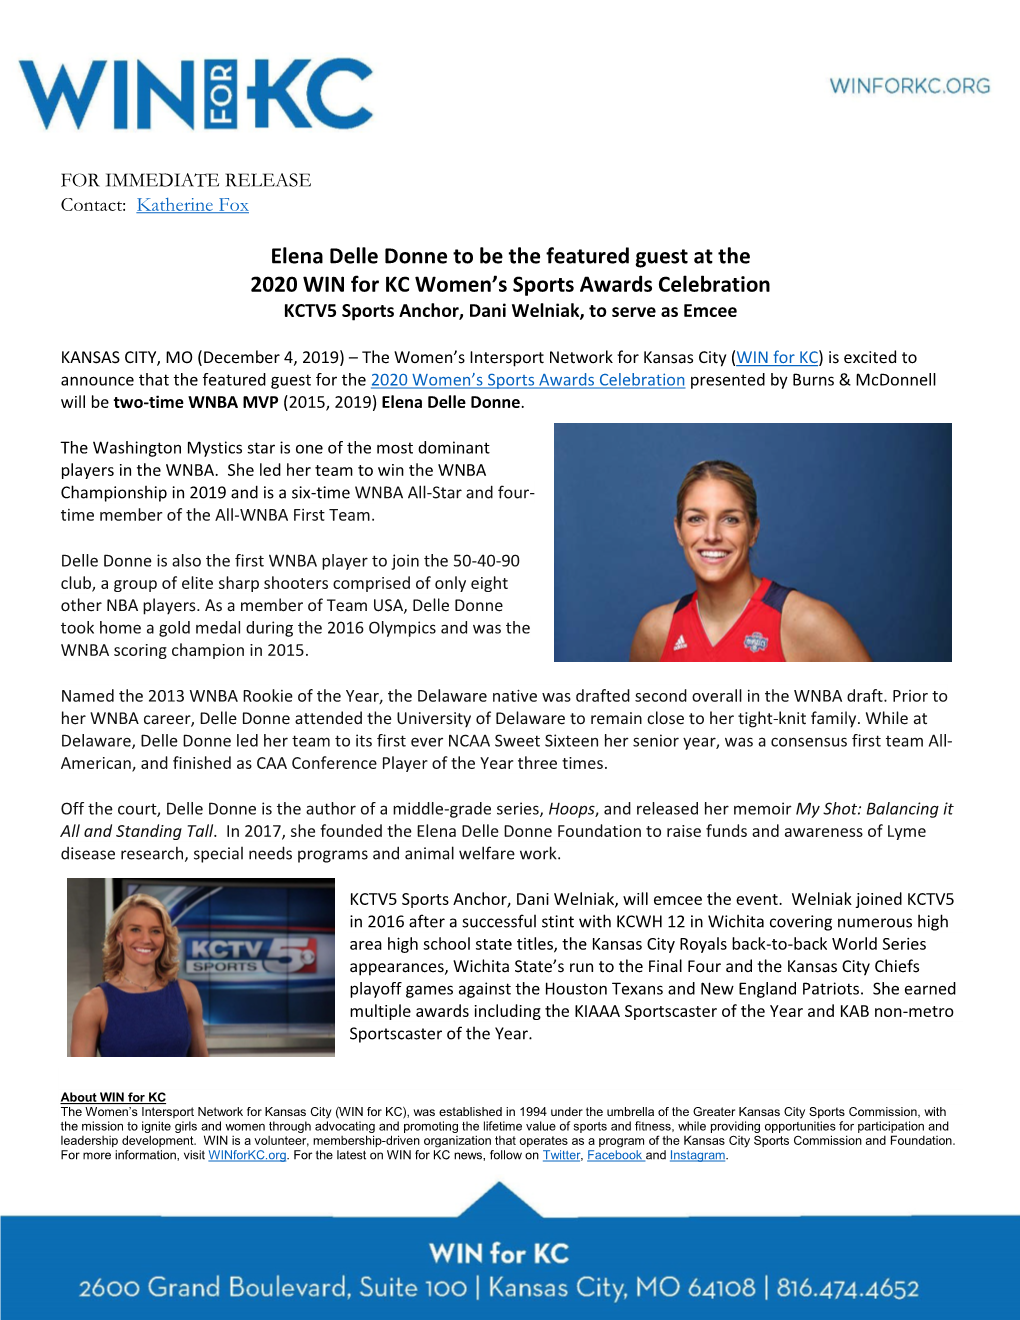 Elena Delle Donne to Be the Featured Guest at the 2020 WIN for KC Women’S Sports Awards Celebration KCTV5 Sports Anchor, Dani Welniak, to Serve As Emcee